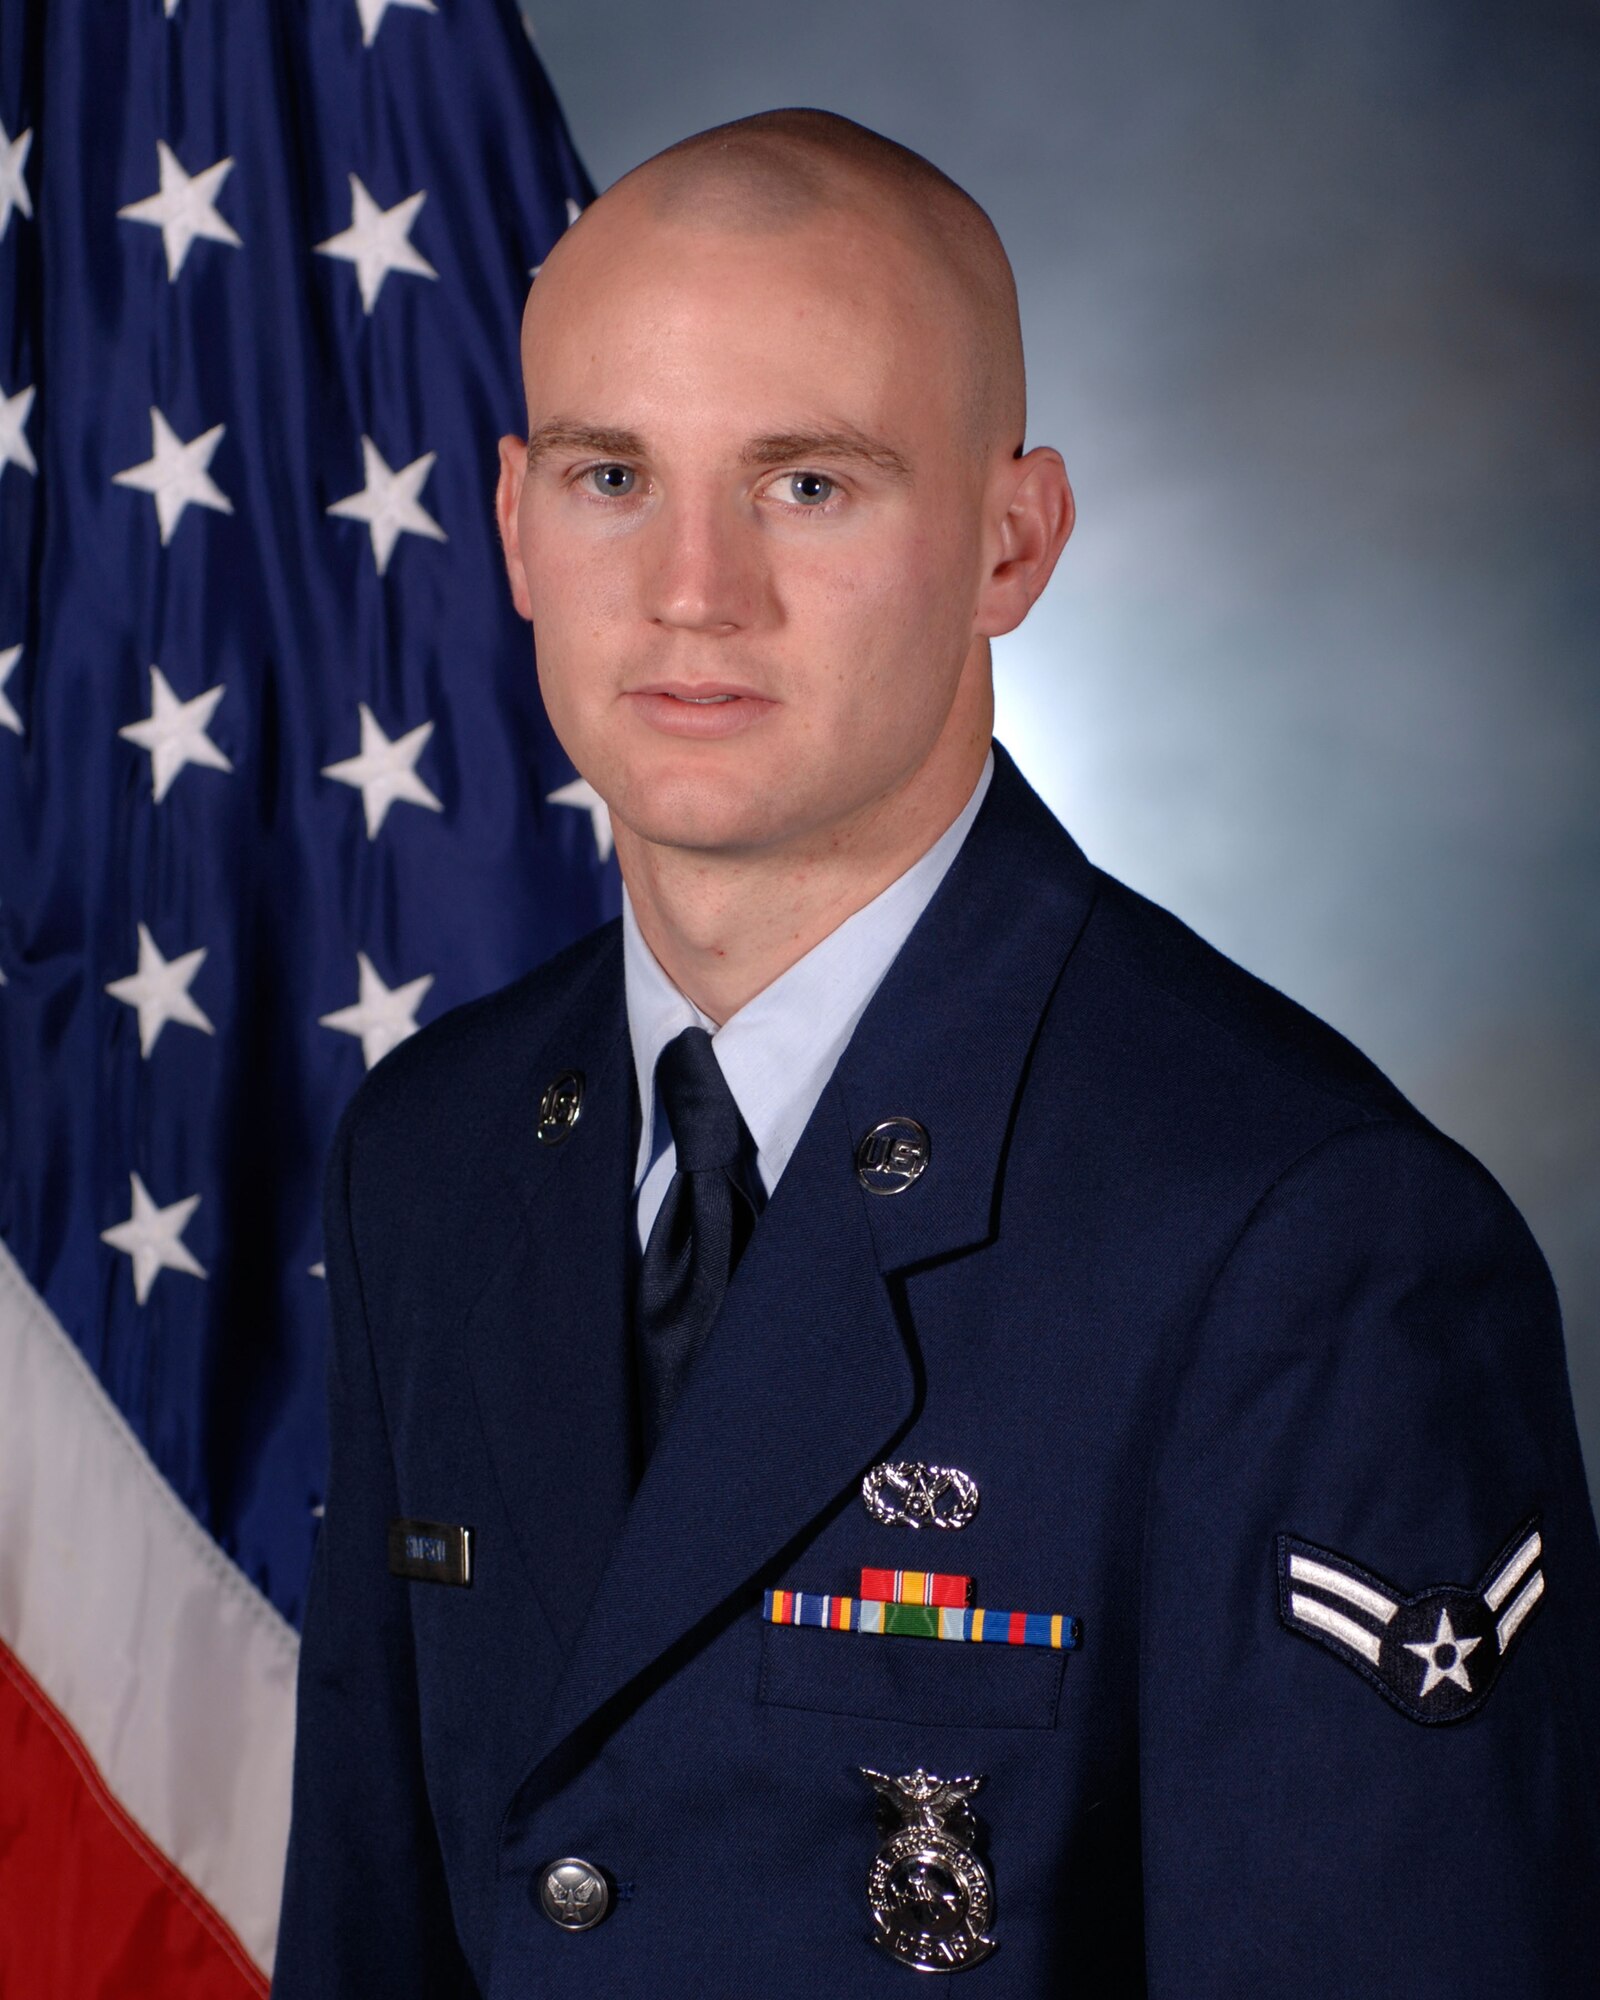 OFFUTT AIR FORCE BASE, Neb. -- Now Senior Airman Cody T. Simpson, from Ellsworth AFB, S.D., is one of 29 Airmen nominated for awards who will attend the 2010 Air Combat Command Outstanding Airmen of the Year Awards Banquet in Omaha, Neb., April 21. Airman Simpson is nominated for the Airman of the Year Award. U.S. Air Force courtesy photo